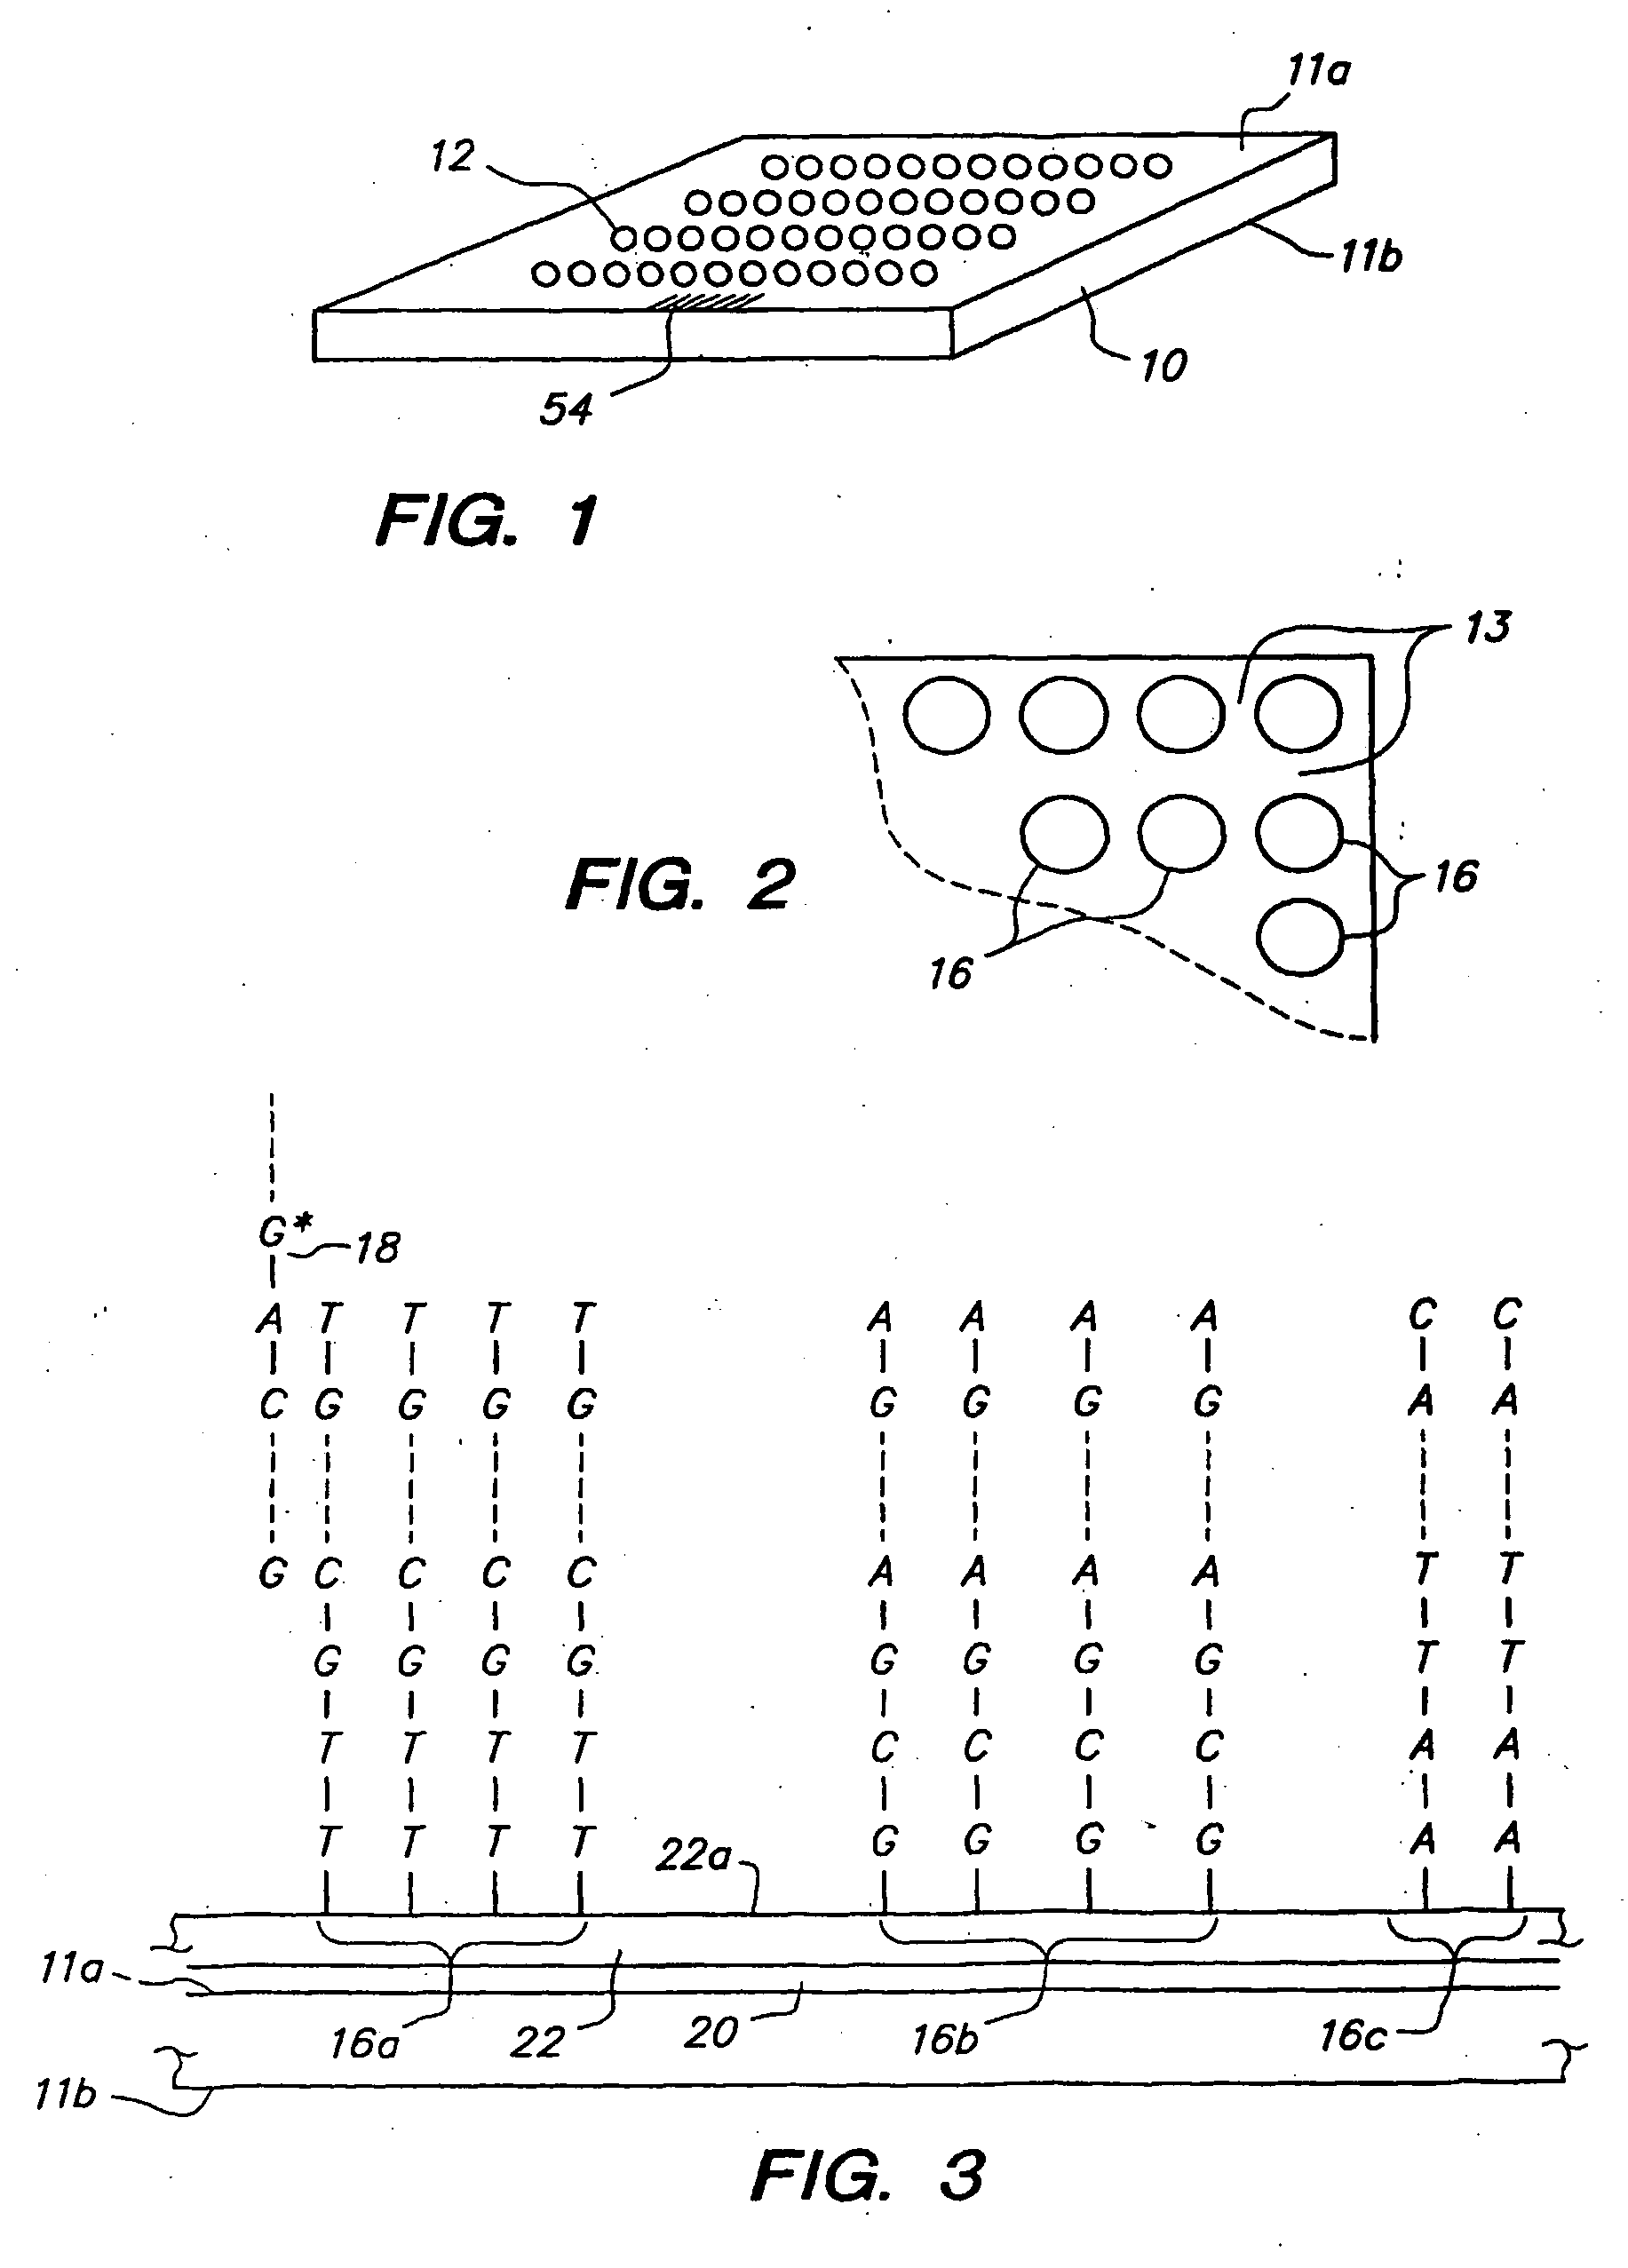 Multi-featured arrays with reflective coating